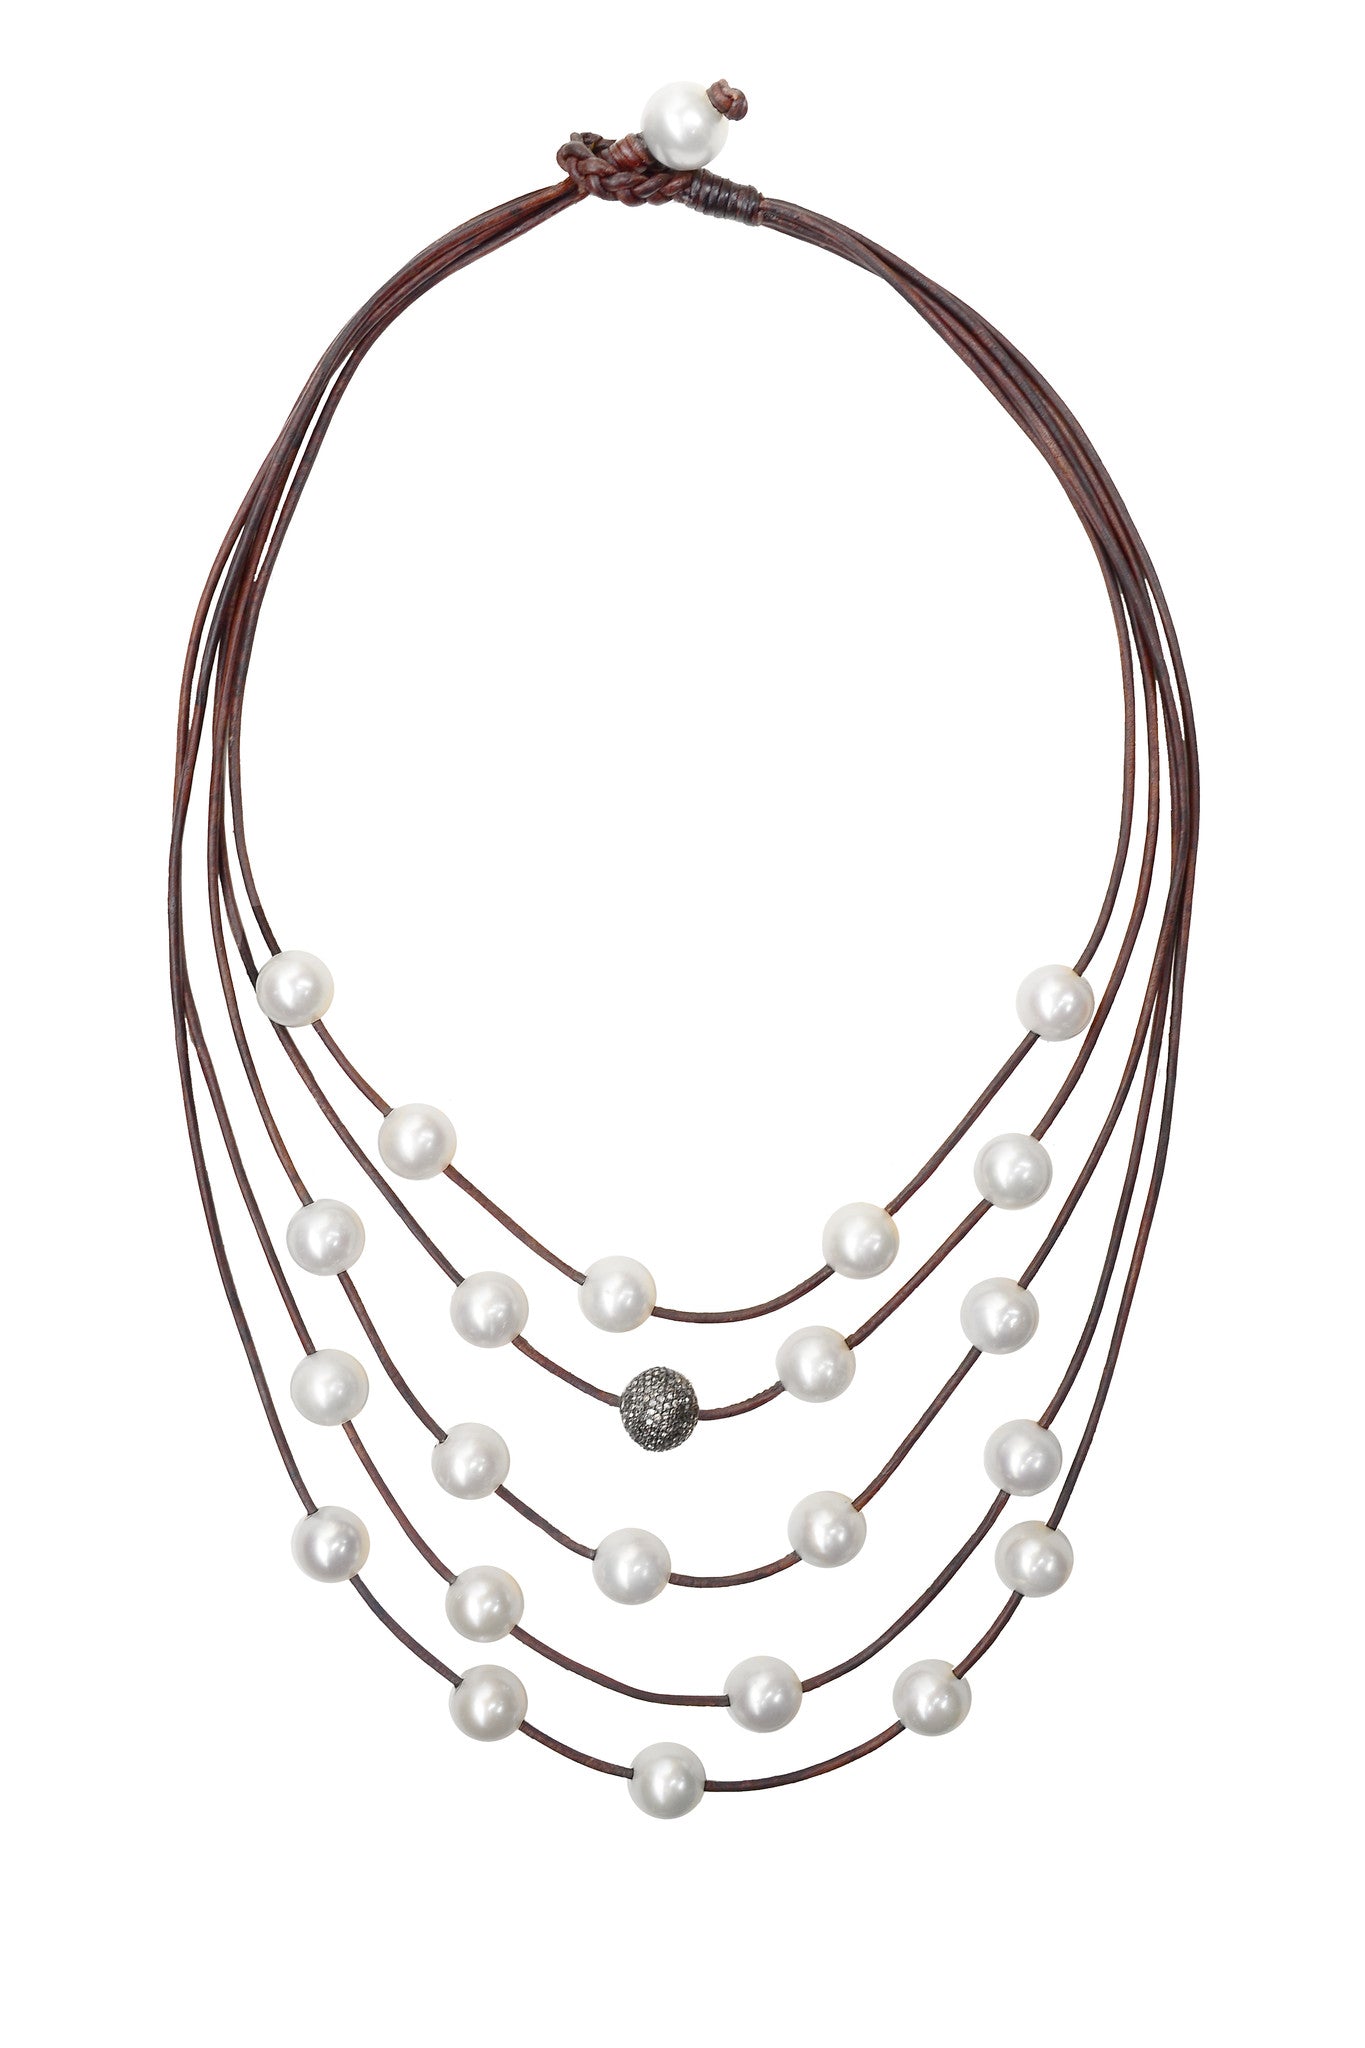 Constellation Necklace, Pavé and Freshwater Pearls - Hottest Designer Pearl and Leather Jewelry | VINCENT PEACH
